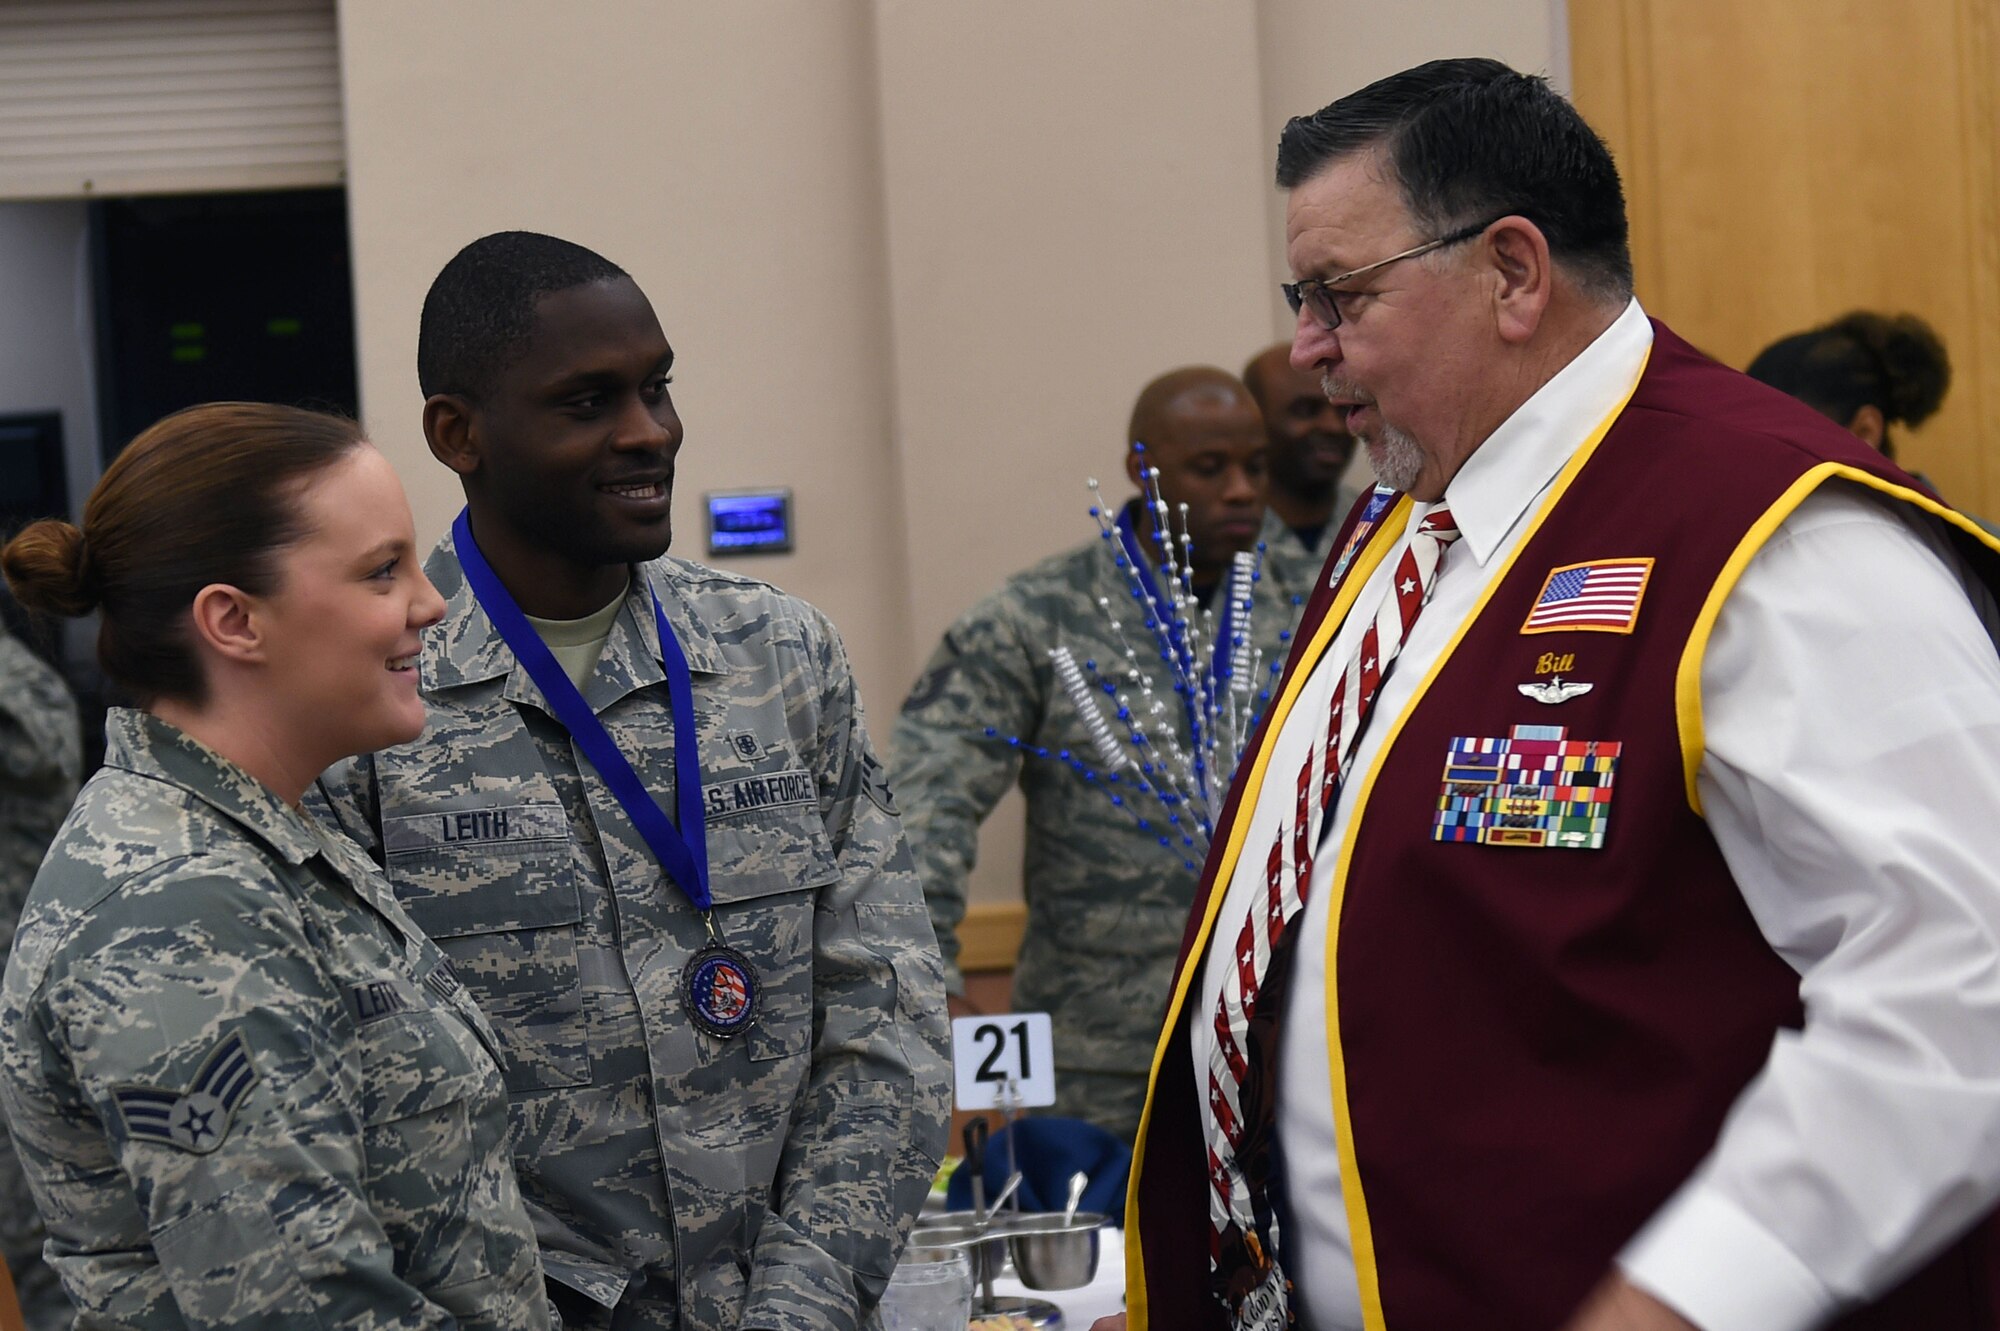 Retired Capt. William A. Robinson, former prisoner of war, visits with Senior Airman Akel Leith, 59th Medical Operations Group mental health technician, and his wife, Senior Airman Tabitha Leith, during the 59th Medical Wing annual awards luncheon. As an airman first class, Robinson spent seven and a half years as a prisoner of war in North Vietnam before his release in 1973. (U.S. Air Force photo/Staff Sgt. Jason Huddleston)